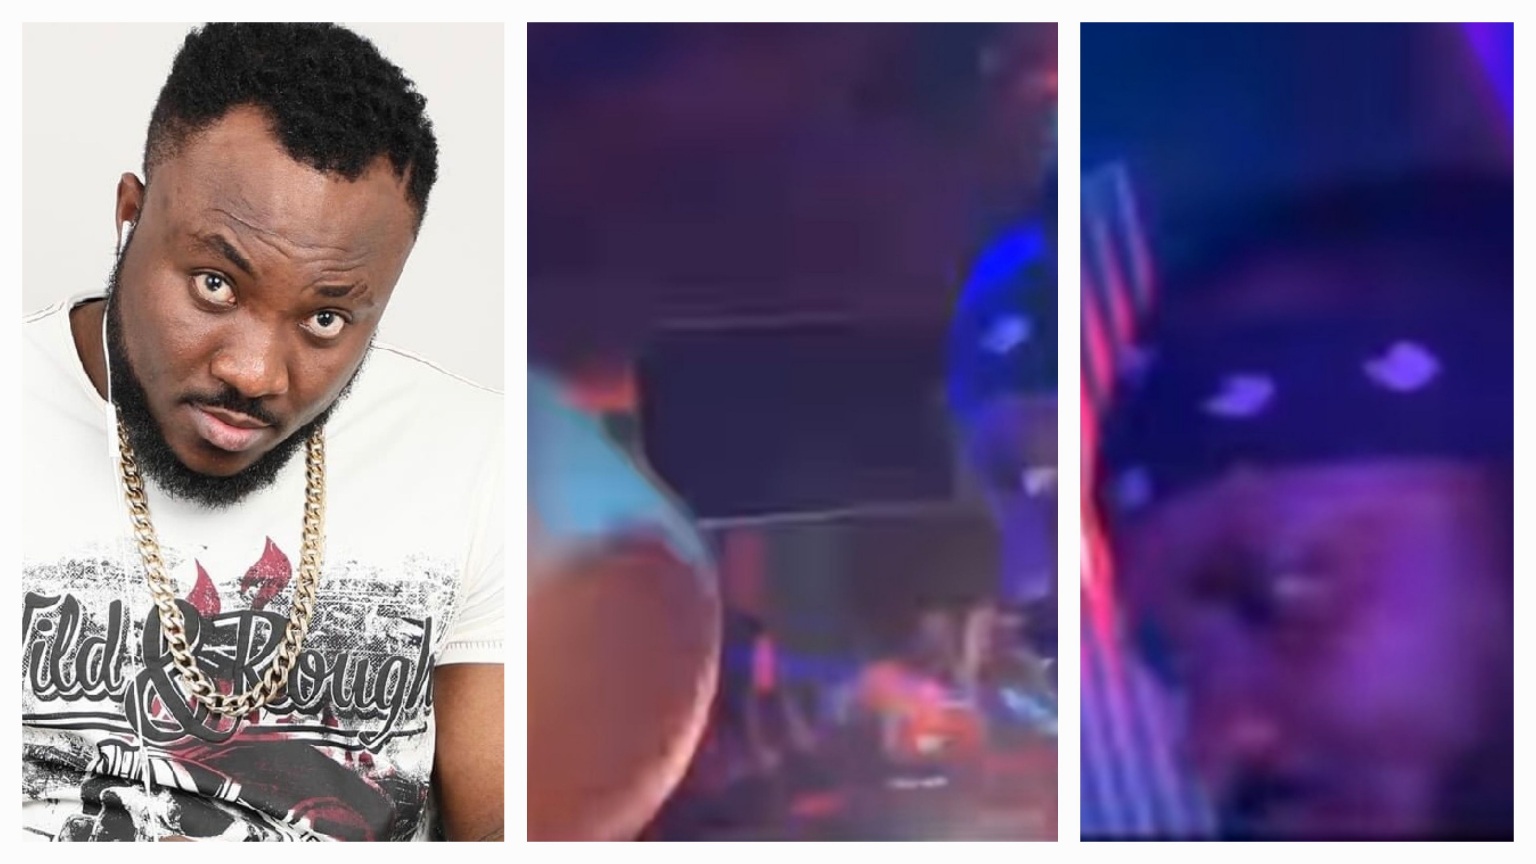 Video of DKB heading a lady's buttocks at nightclub